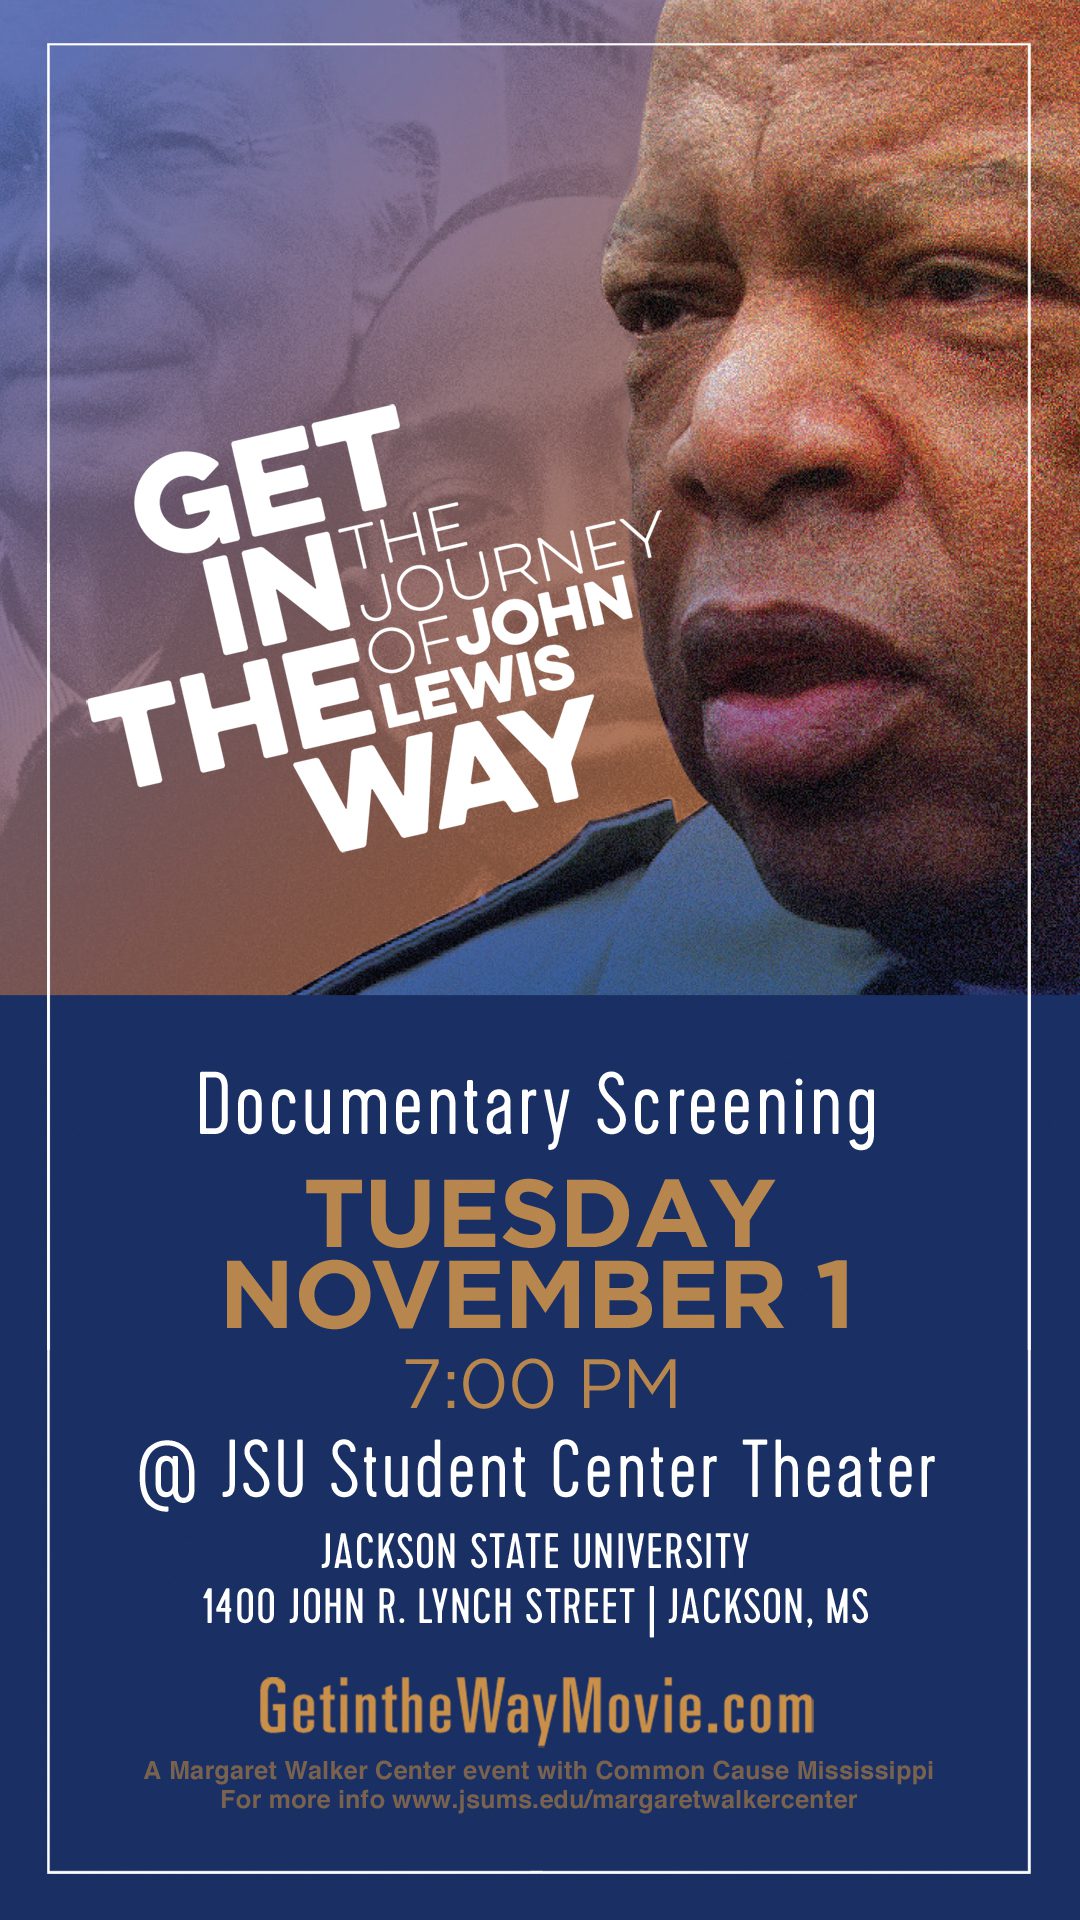 2016-10-28get-in-the-way_john-lewis-2016_eposter_1080x1920-ready